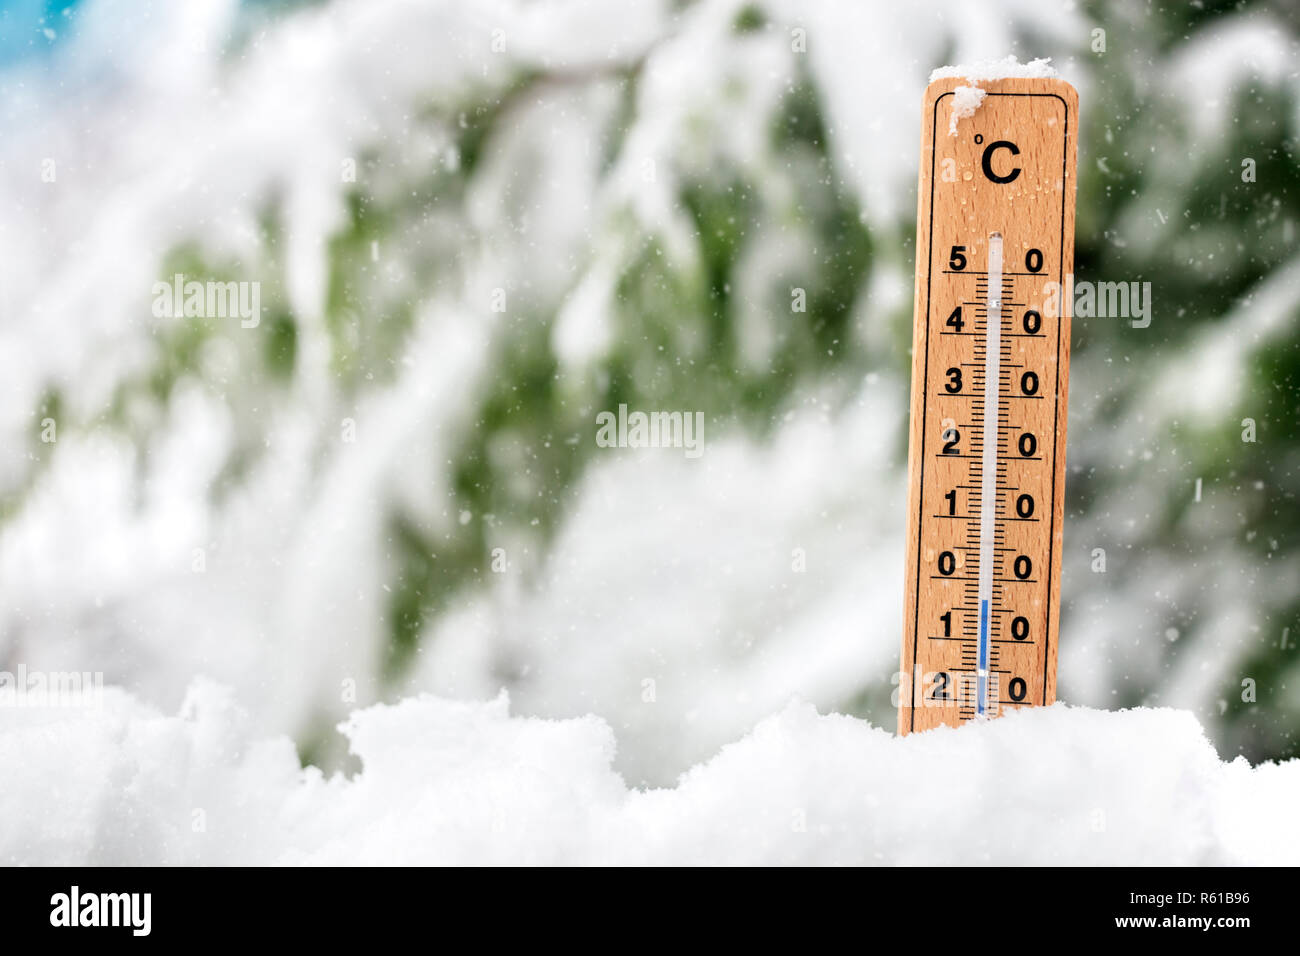 Thermometer showing freezing cold temperature in the snow concept for winter Stock Photo